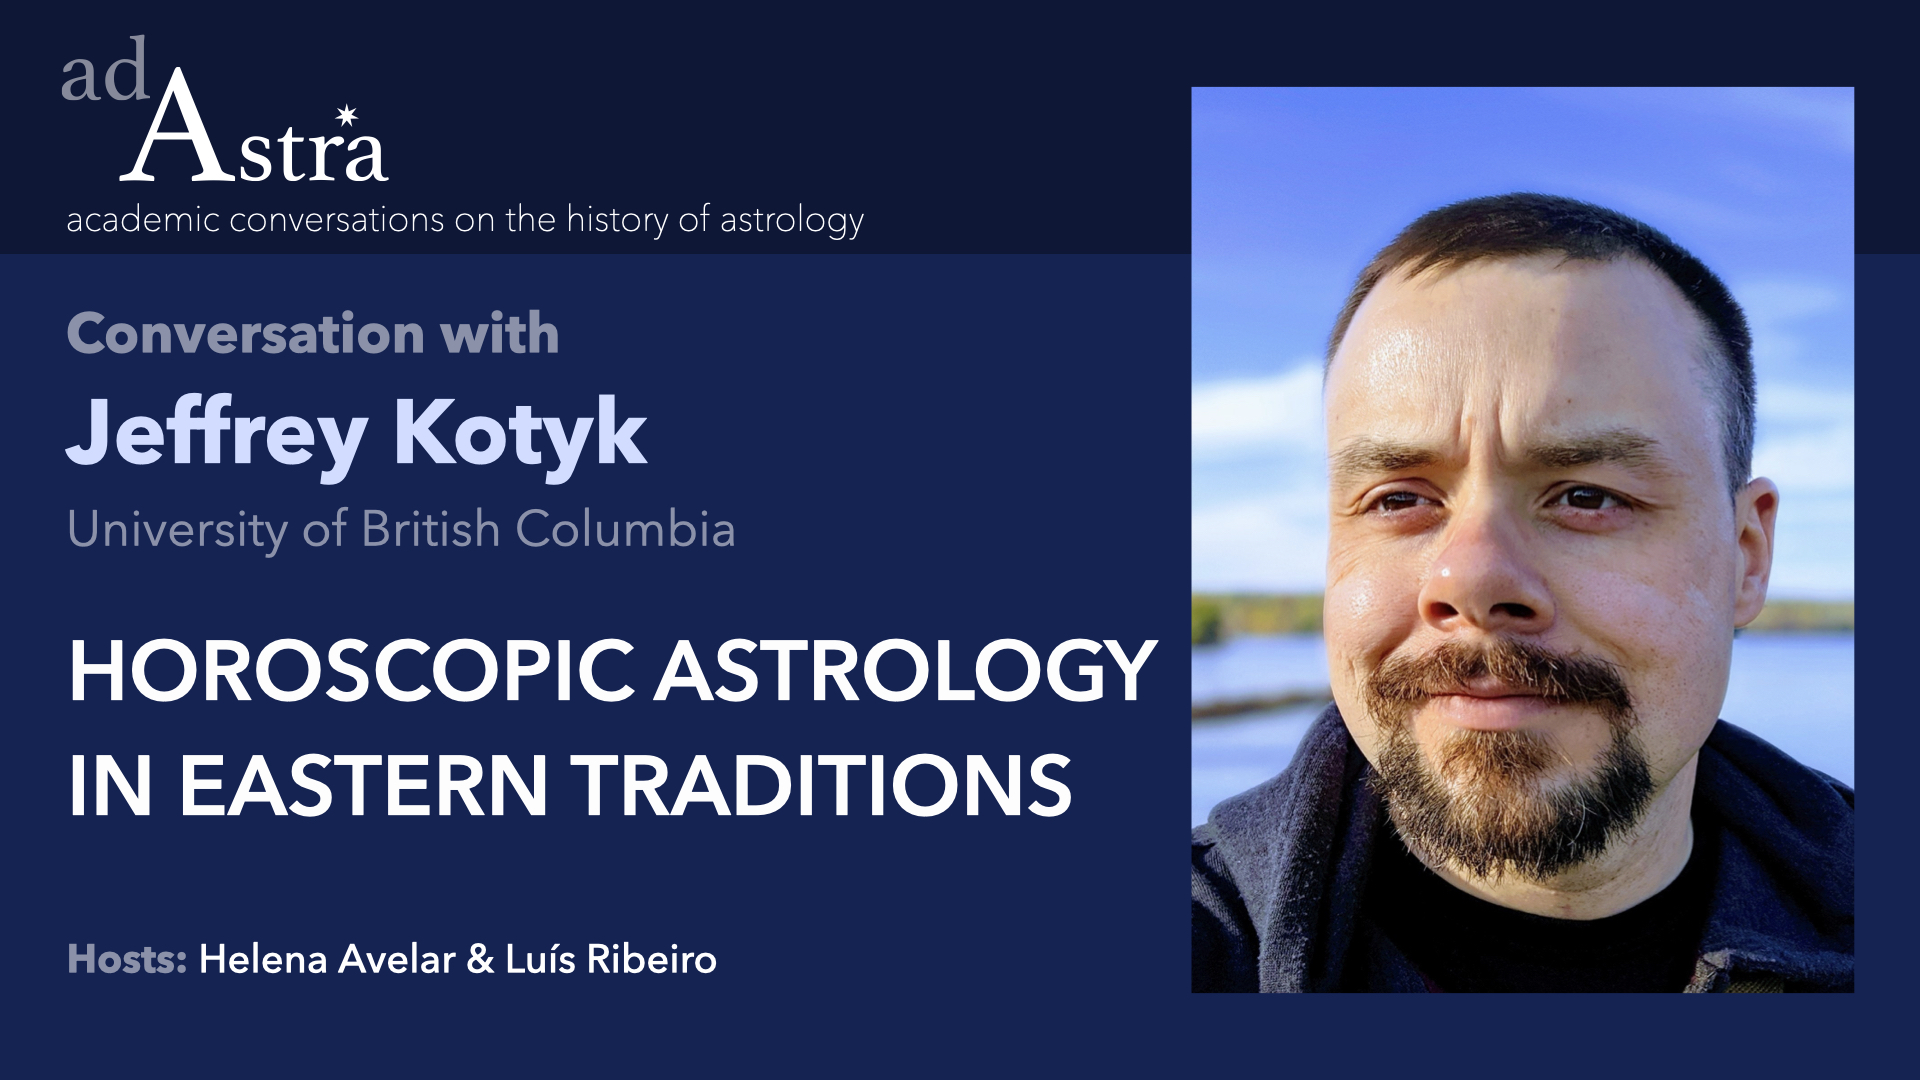 Horoscopic astrology in Eastern traditions with Jeffrey Kotyk